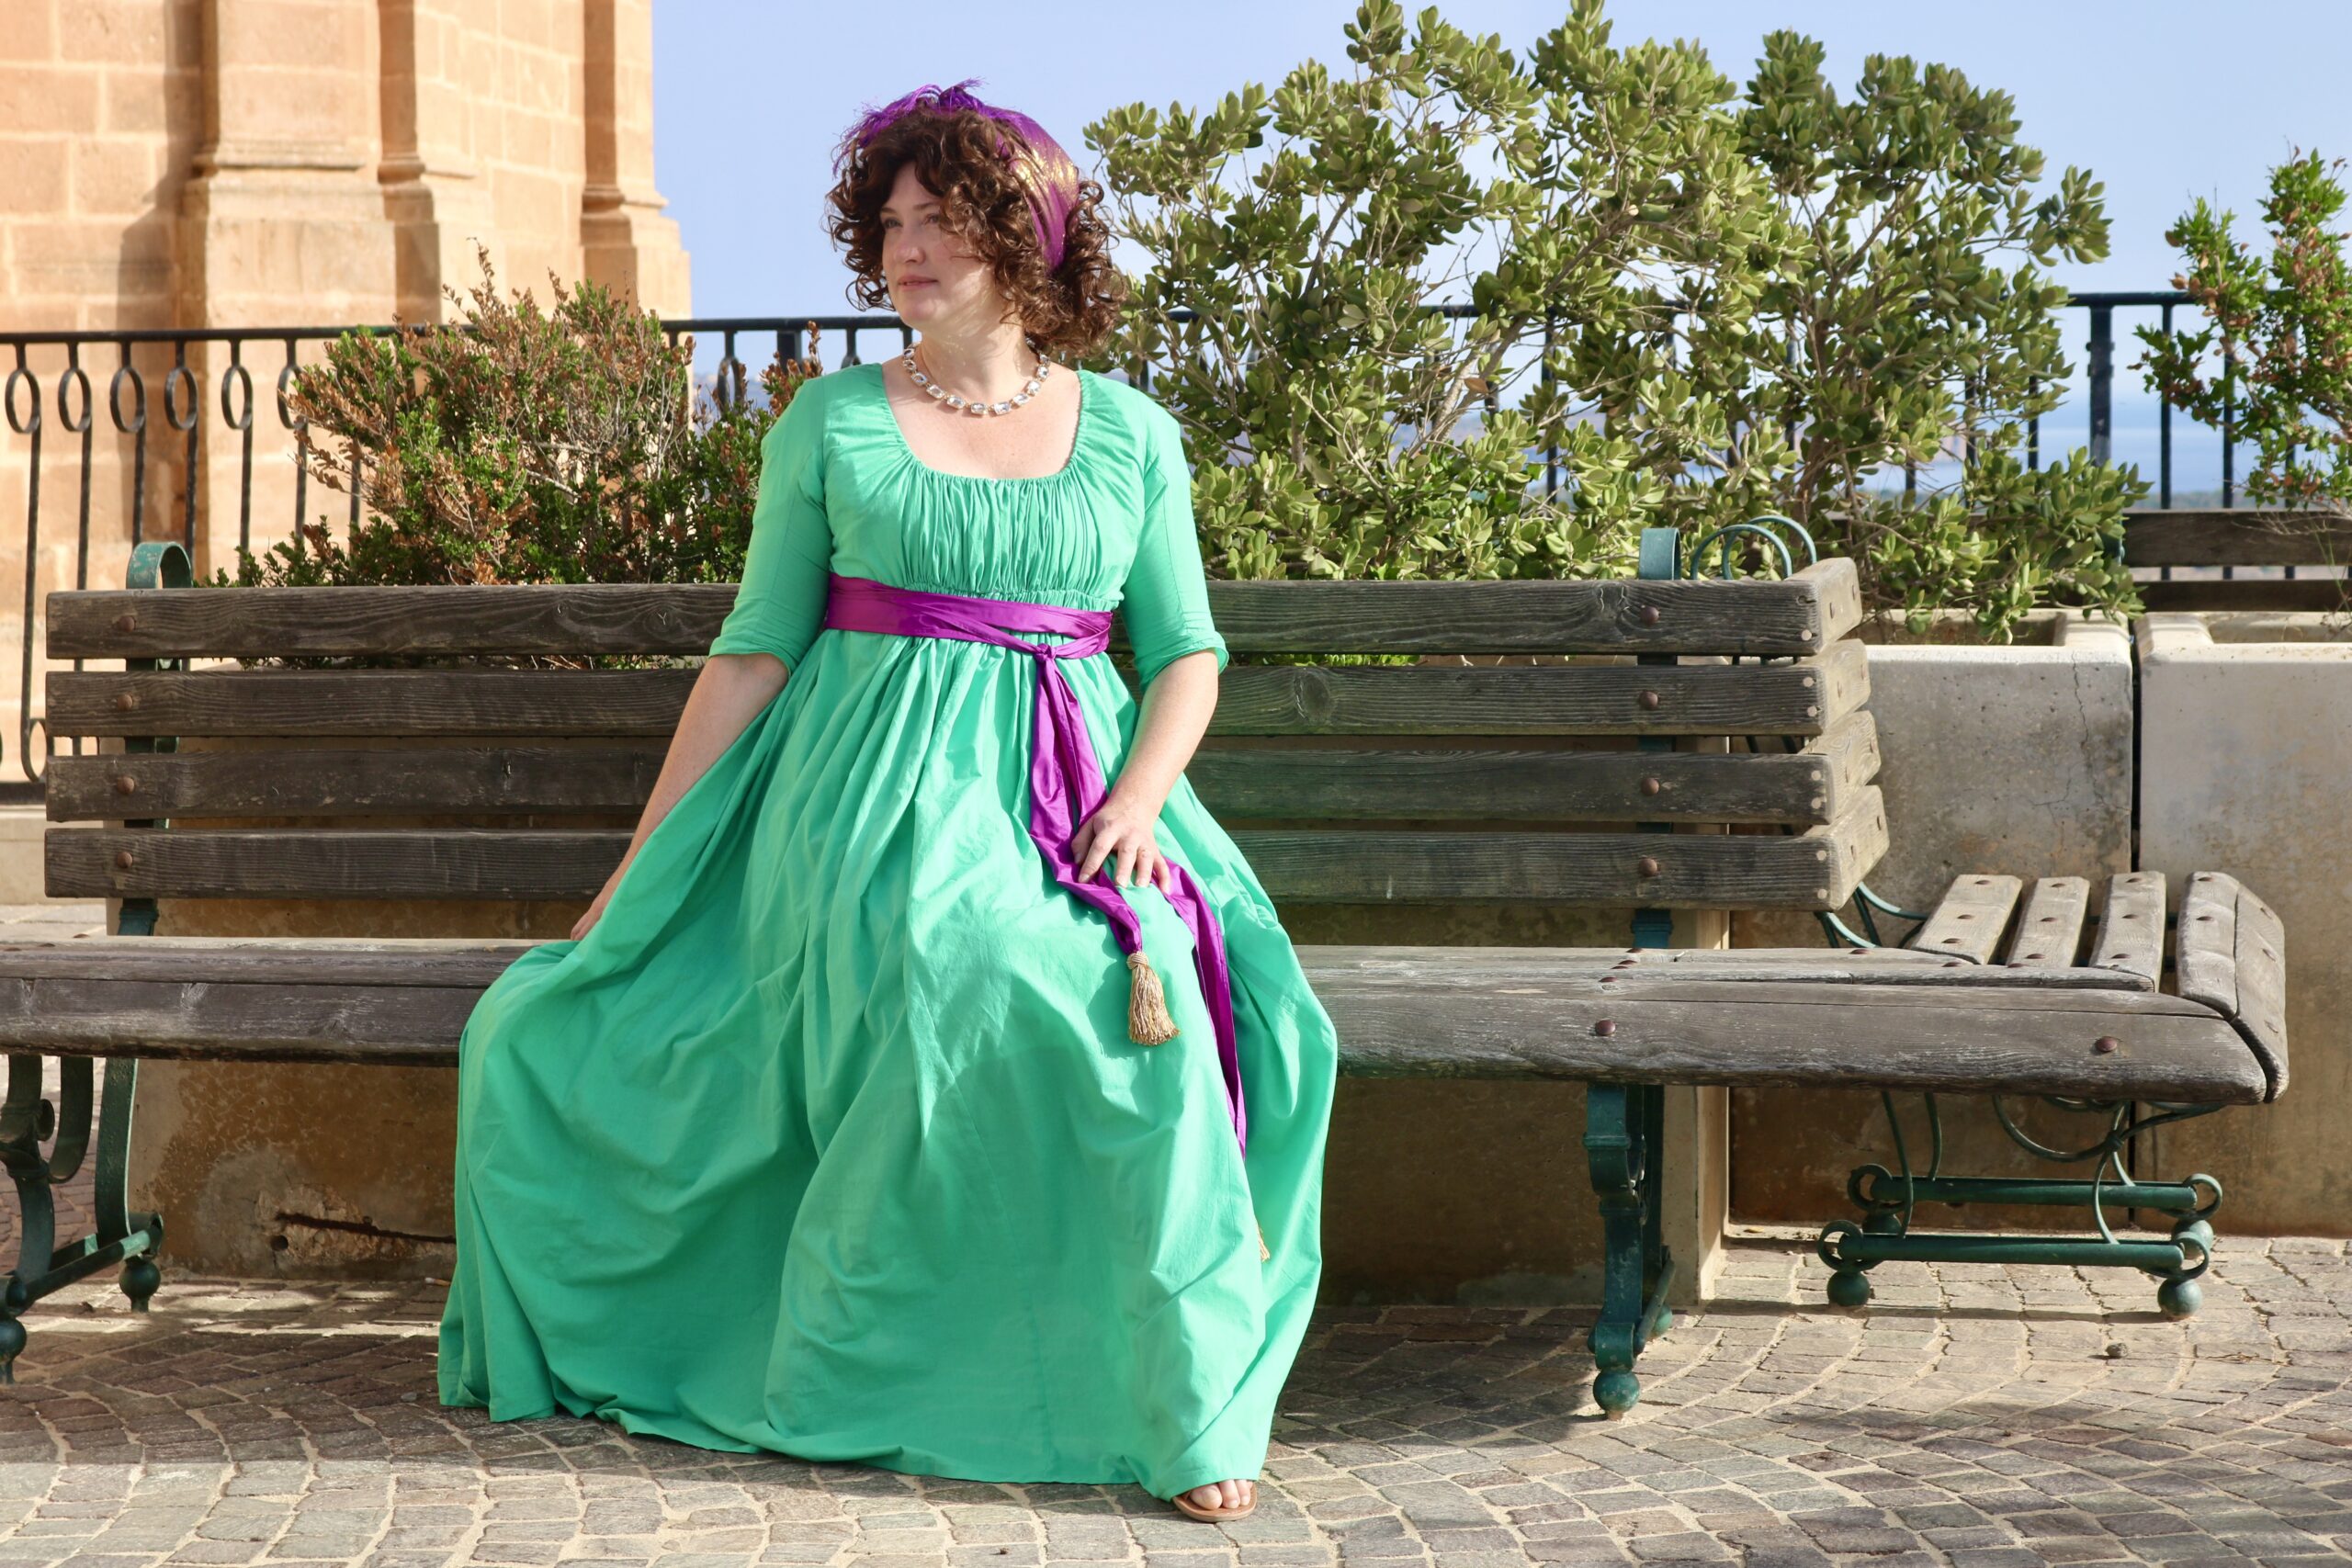 Introducing Lady Hamilton: a Green 1790s Round Gown in Malta